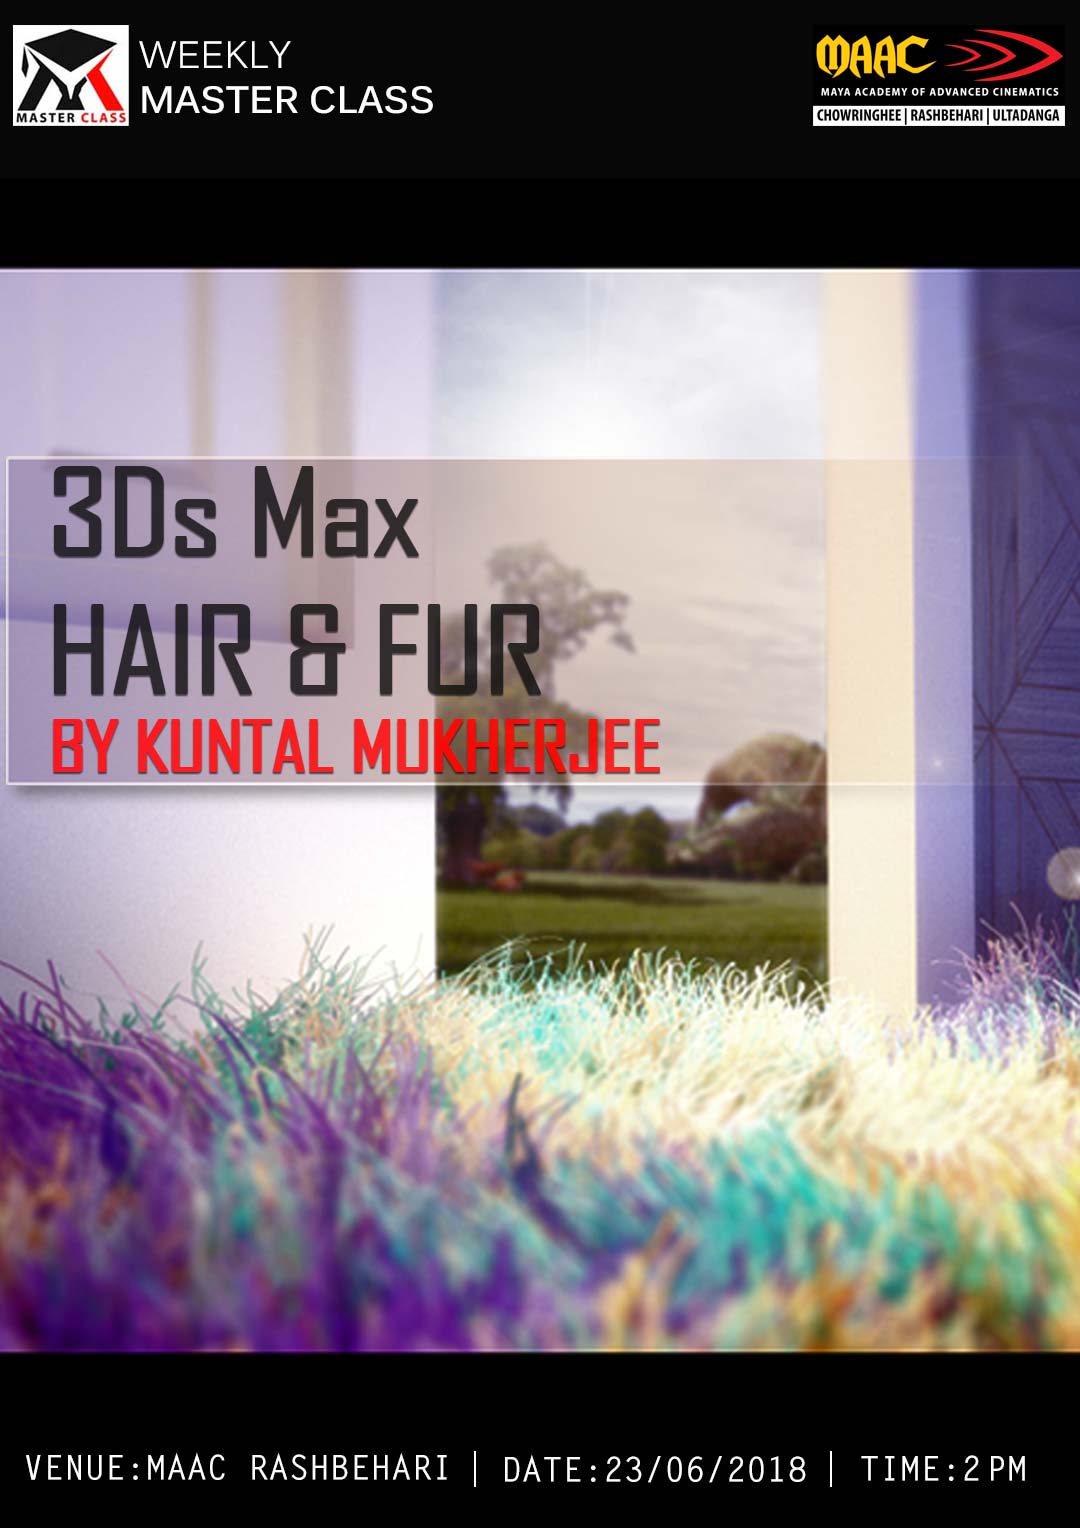 Weekly Master Class on 3ds Max Hair and Fur